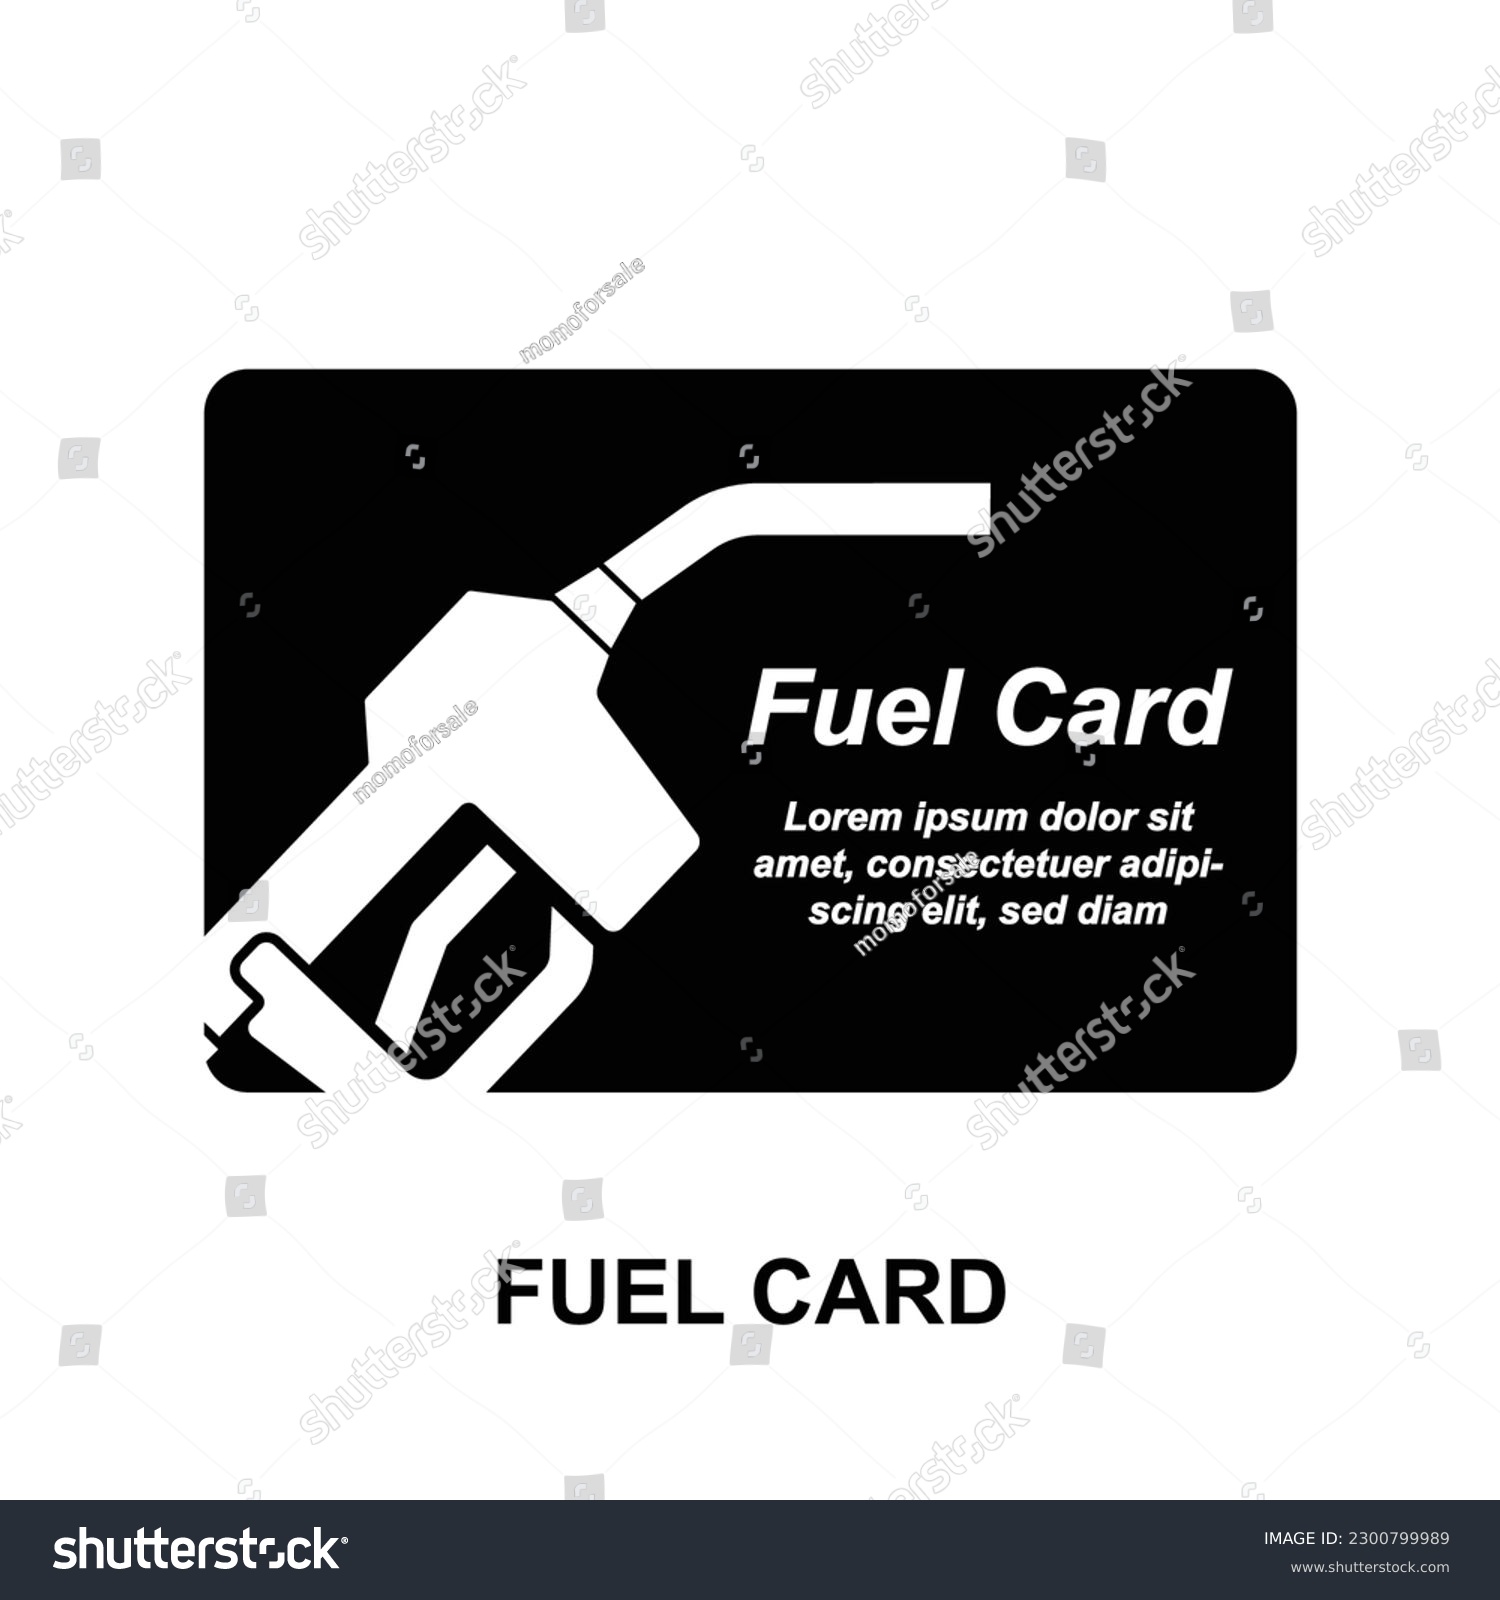 SVG of Fuel card card icon isolated on background  vector illustration. svg